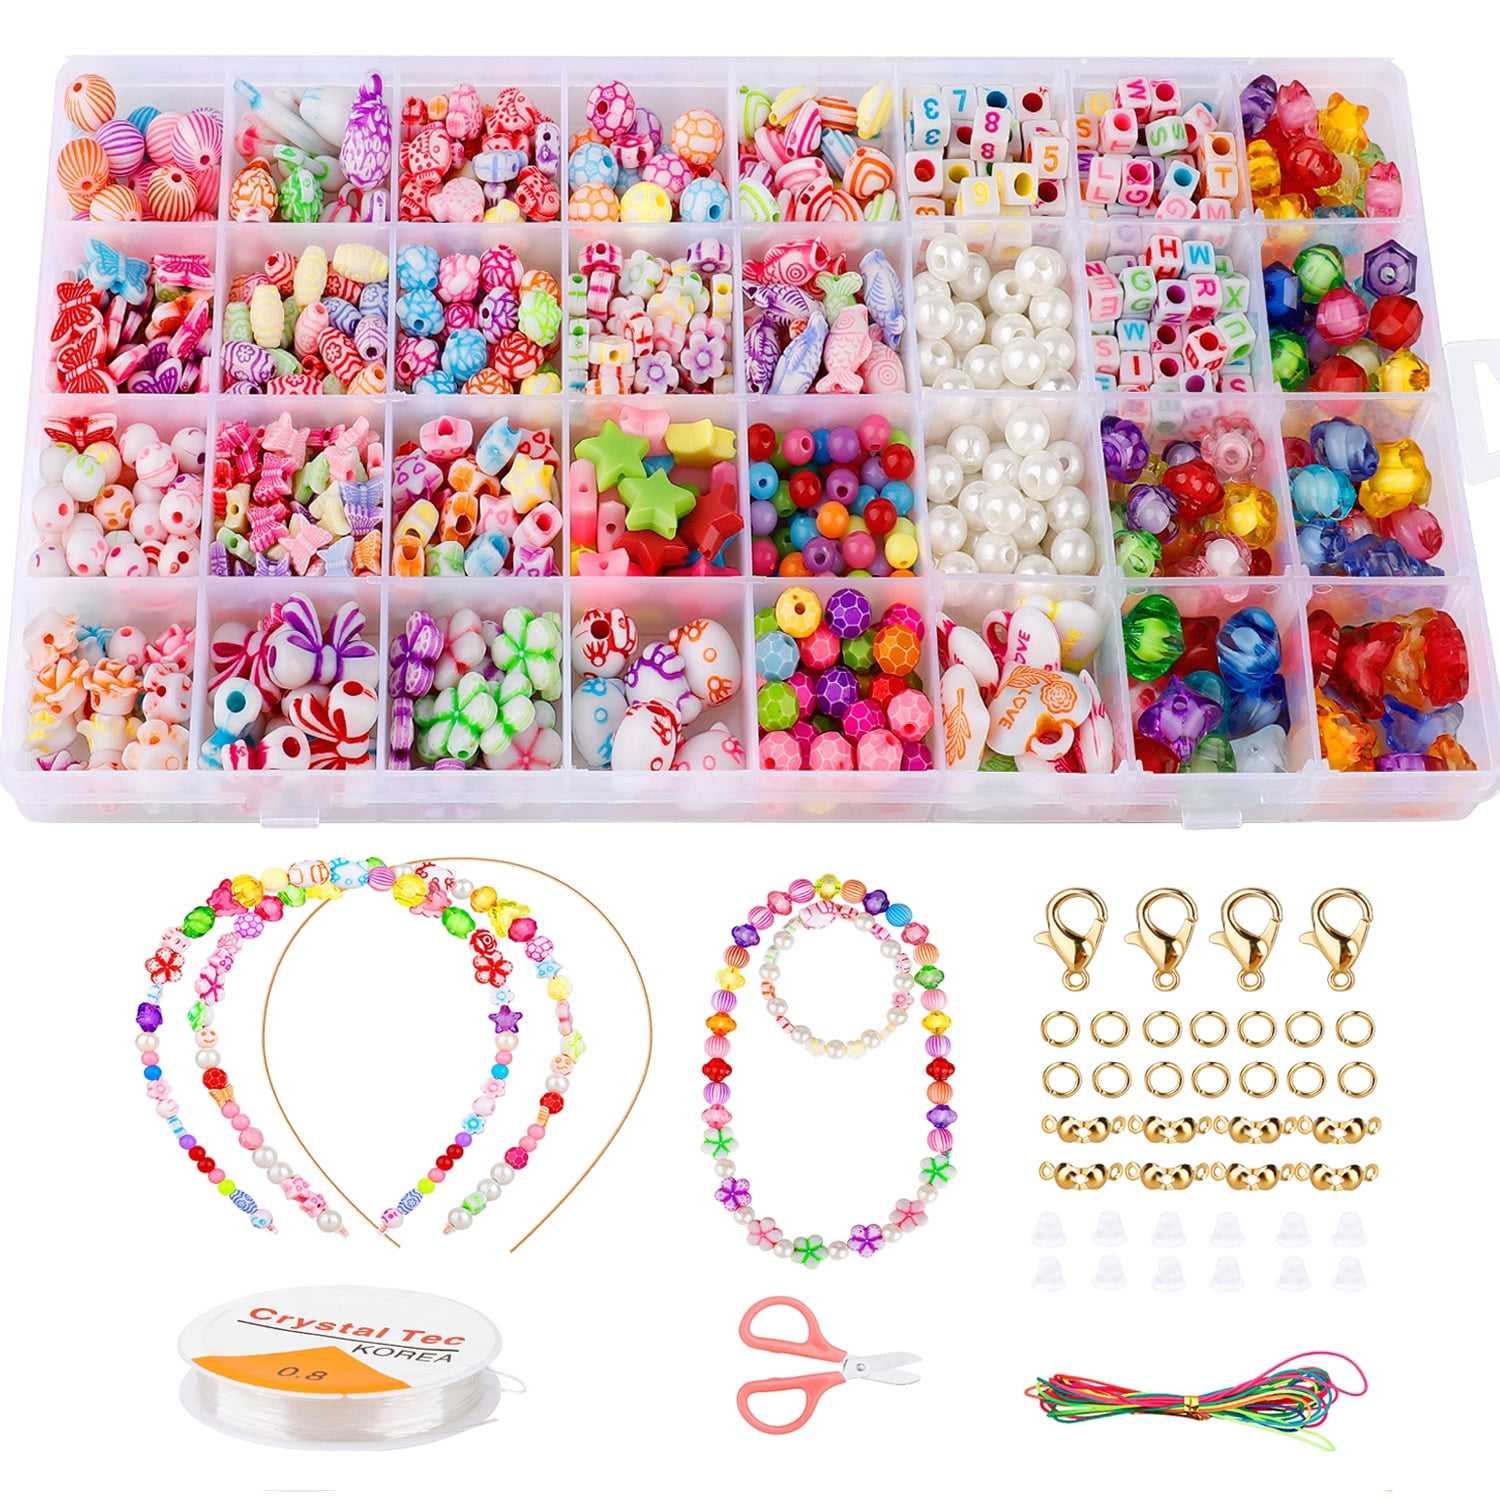 Licien Sunshine DIY Beads Set with Different Types and Shapes of Colorful Acrylic Jewelry Beads in a Box for Children Necklace and Bracelet Crafts gift Best DIY Beads Toys for children 4th to 12 By 